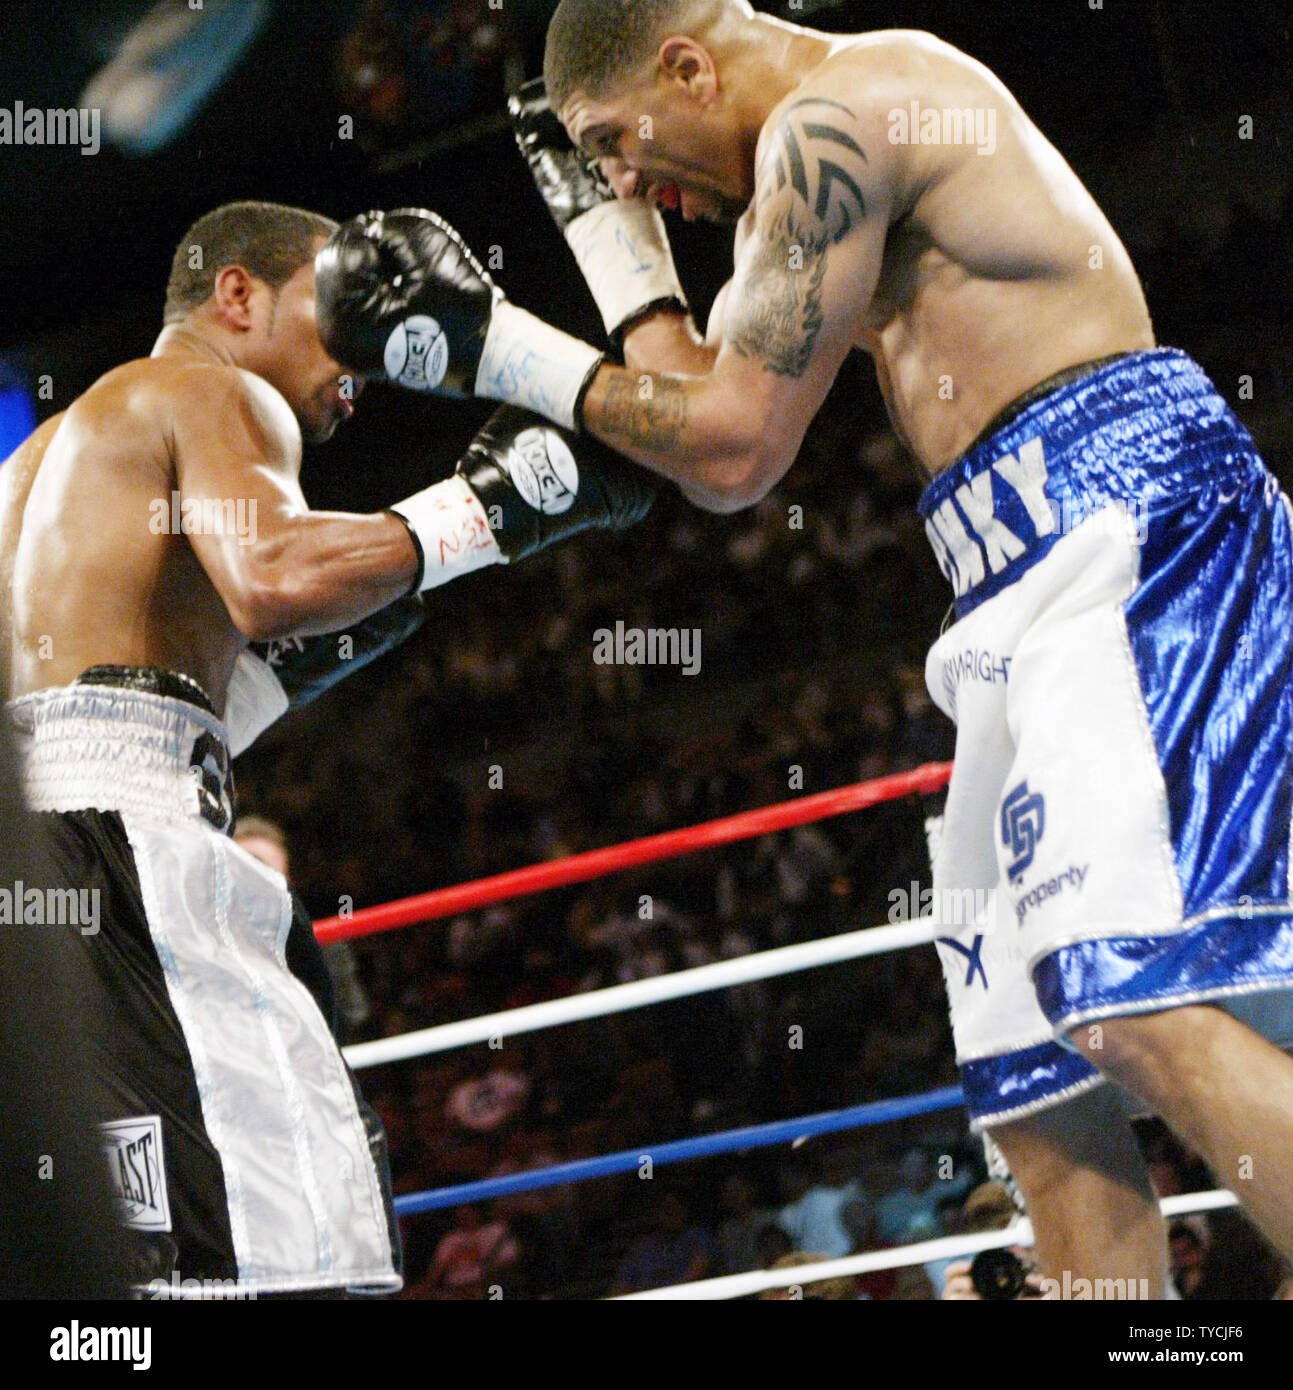 Winky Wright of St. Petersburg FL (right) consolidated the 154 pound titles to become undisputed champion with a decision over Sugar Shane Mosley at Mandalay Bay, March 13, 2004. (UPI Photo/Roger Williams) Stock Photo